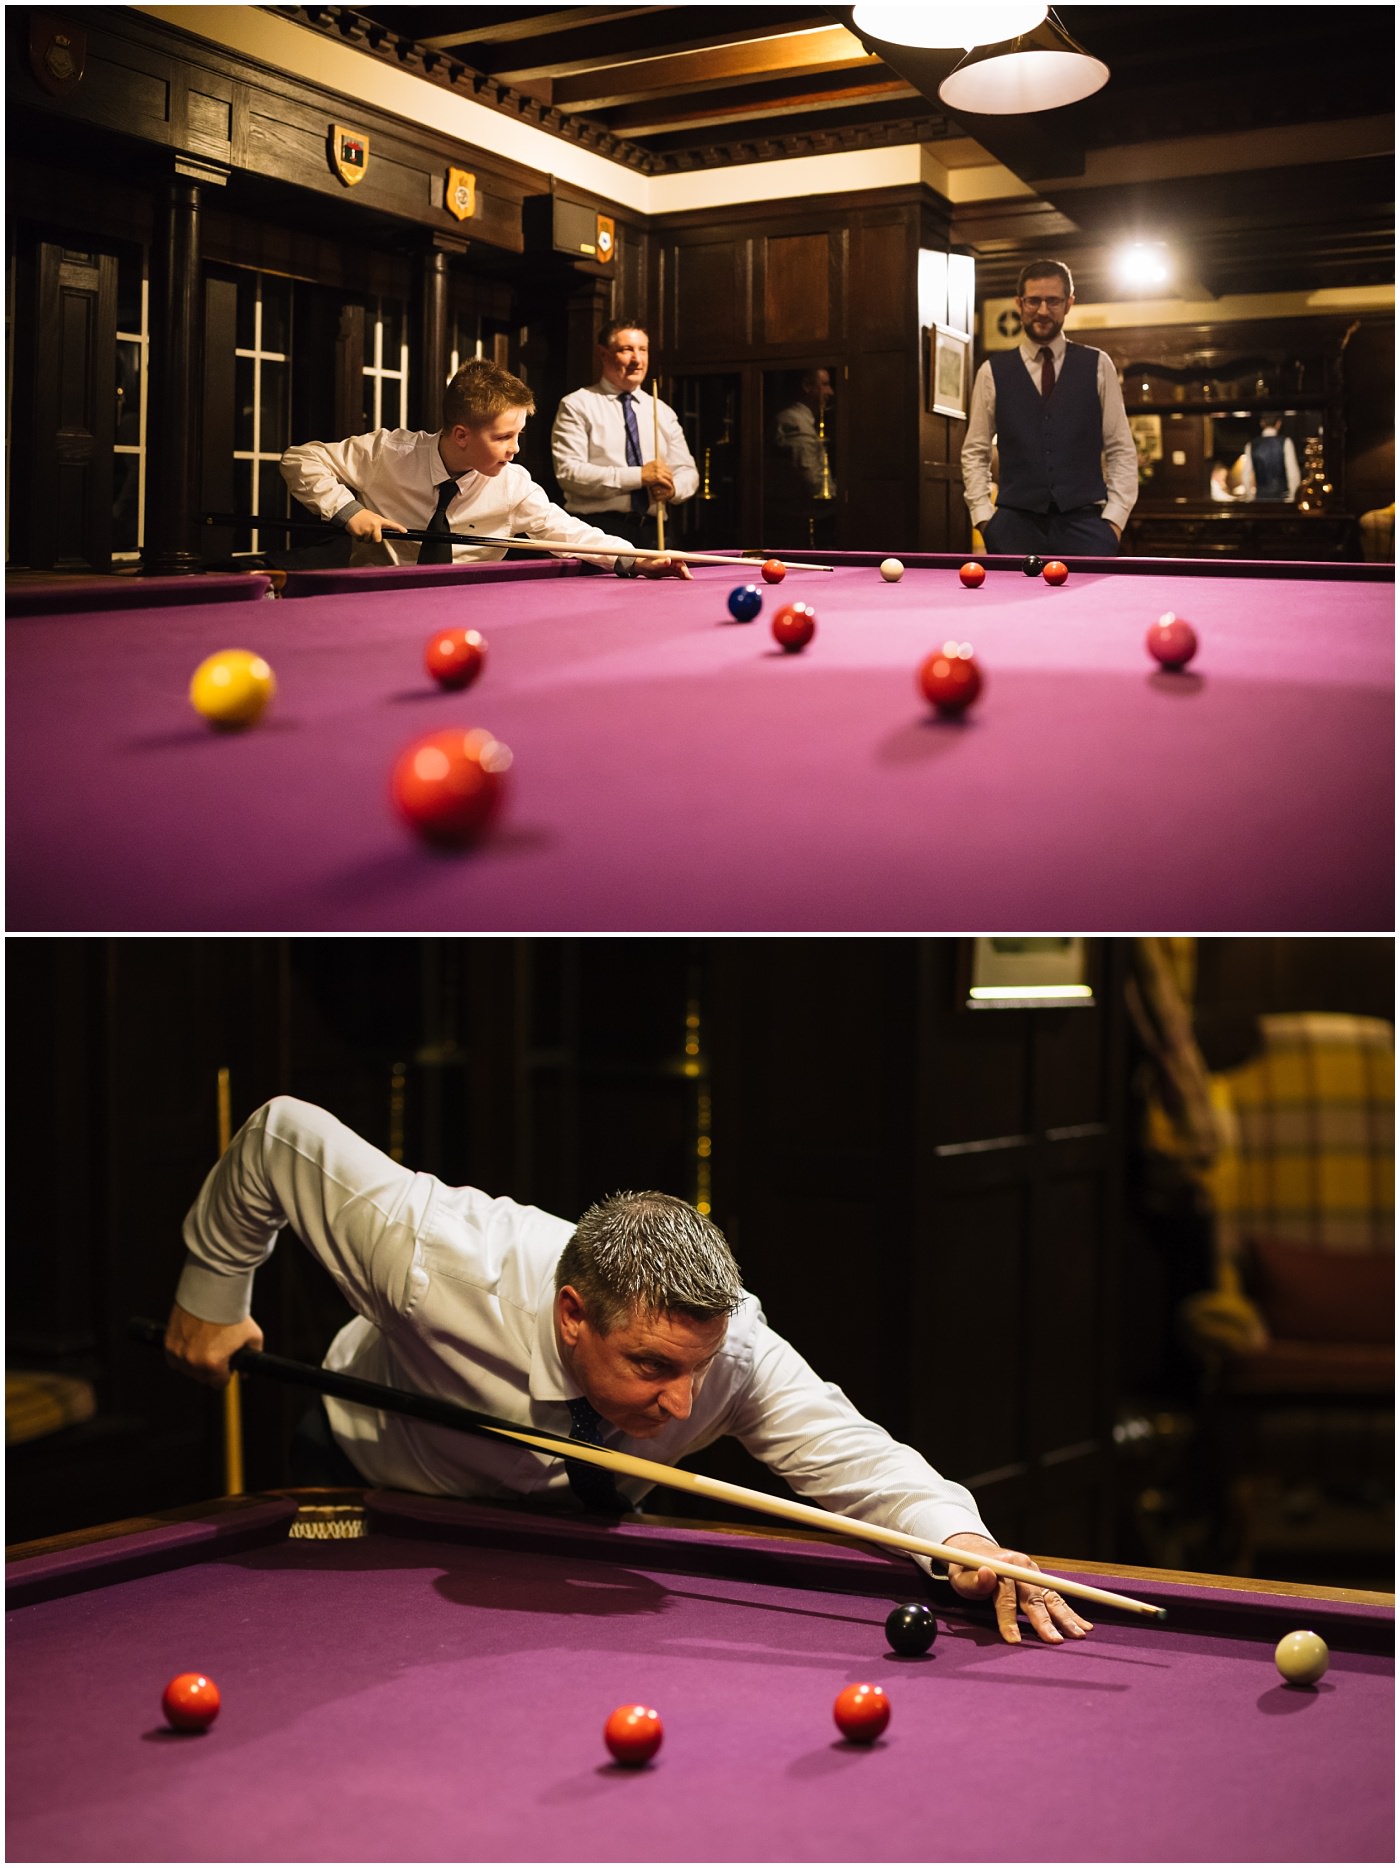 Guests in the snooker room at Eaves Hall